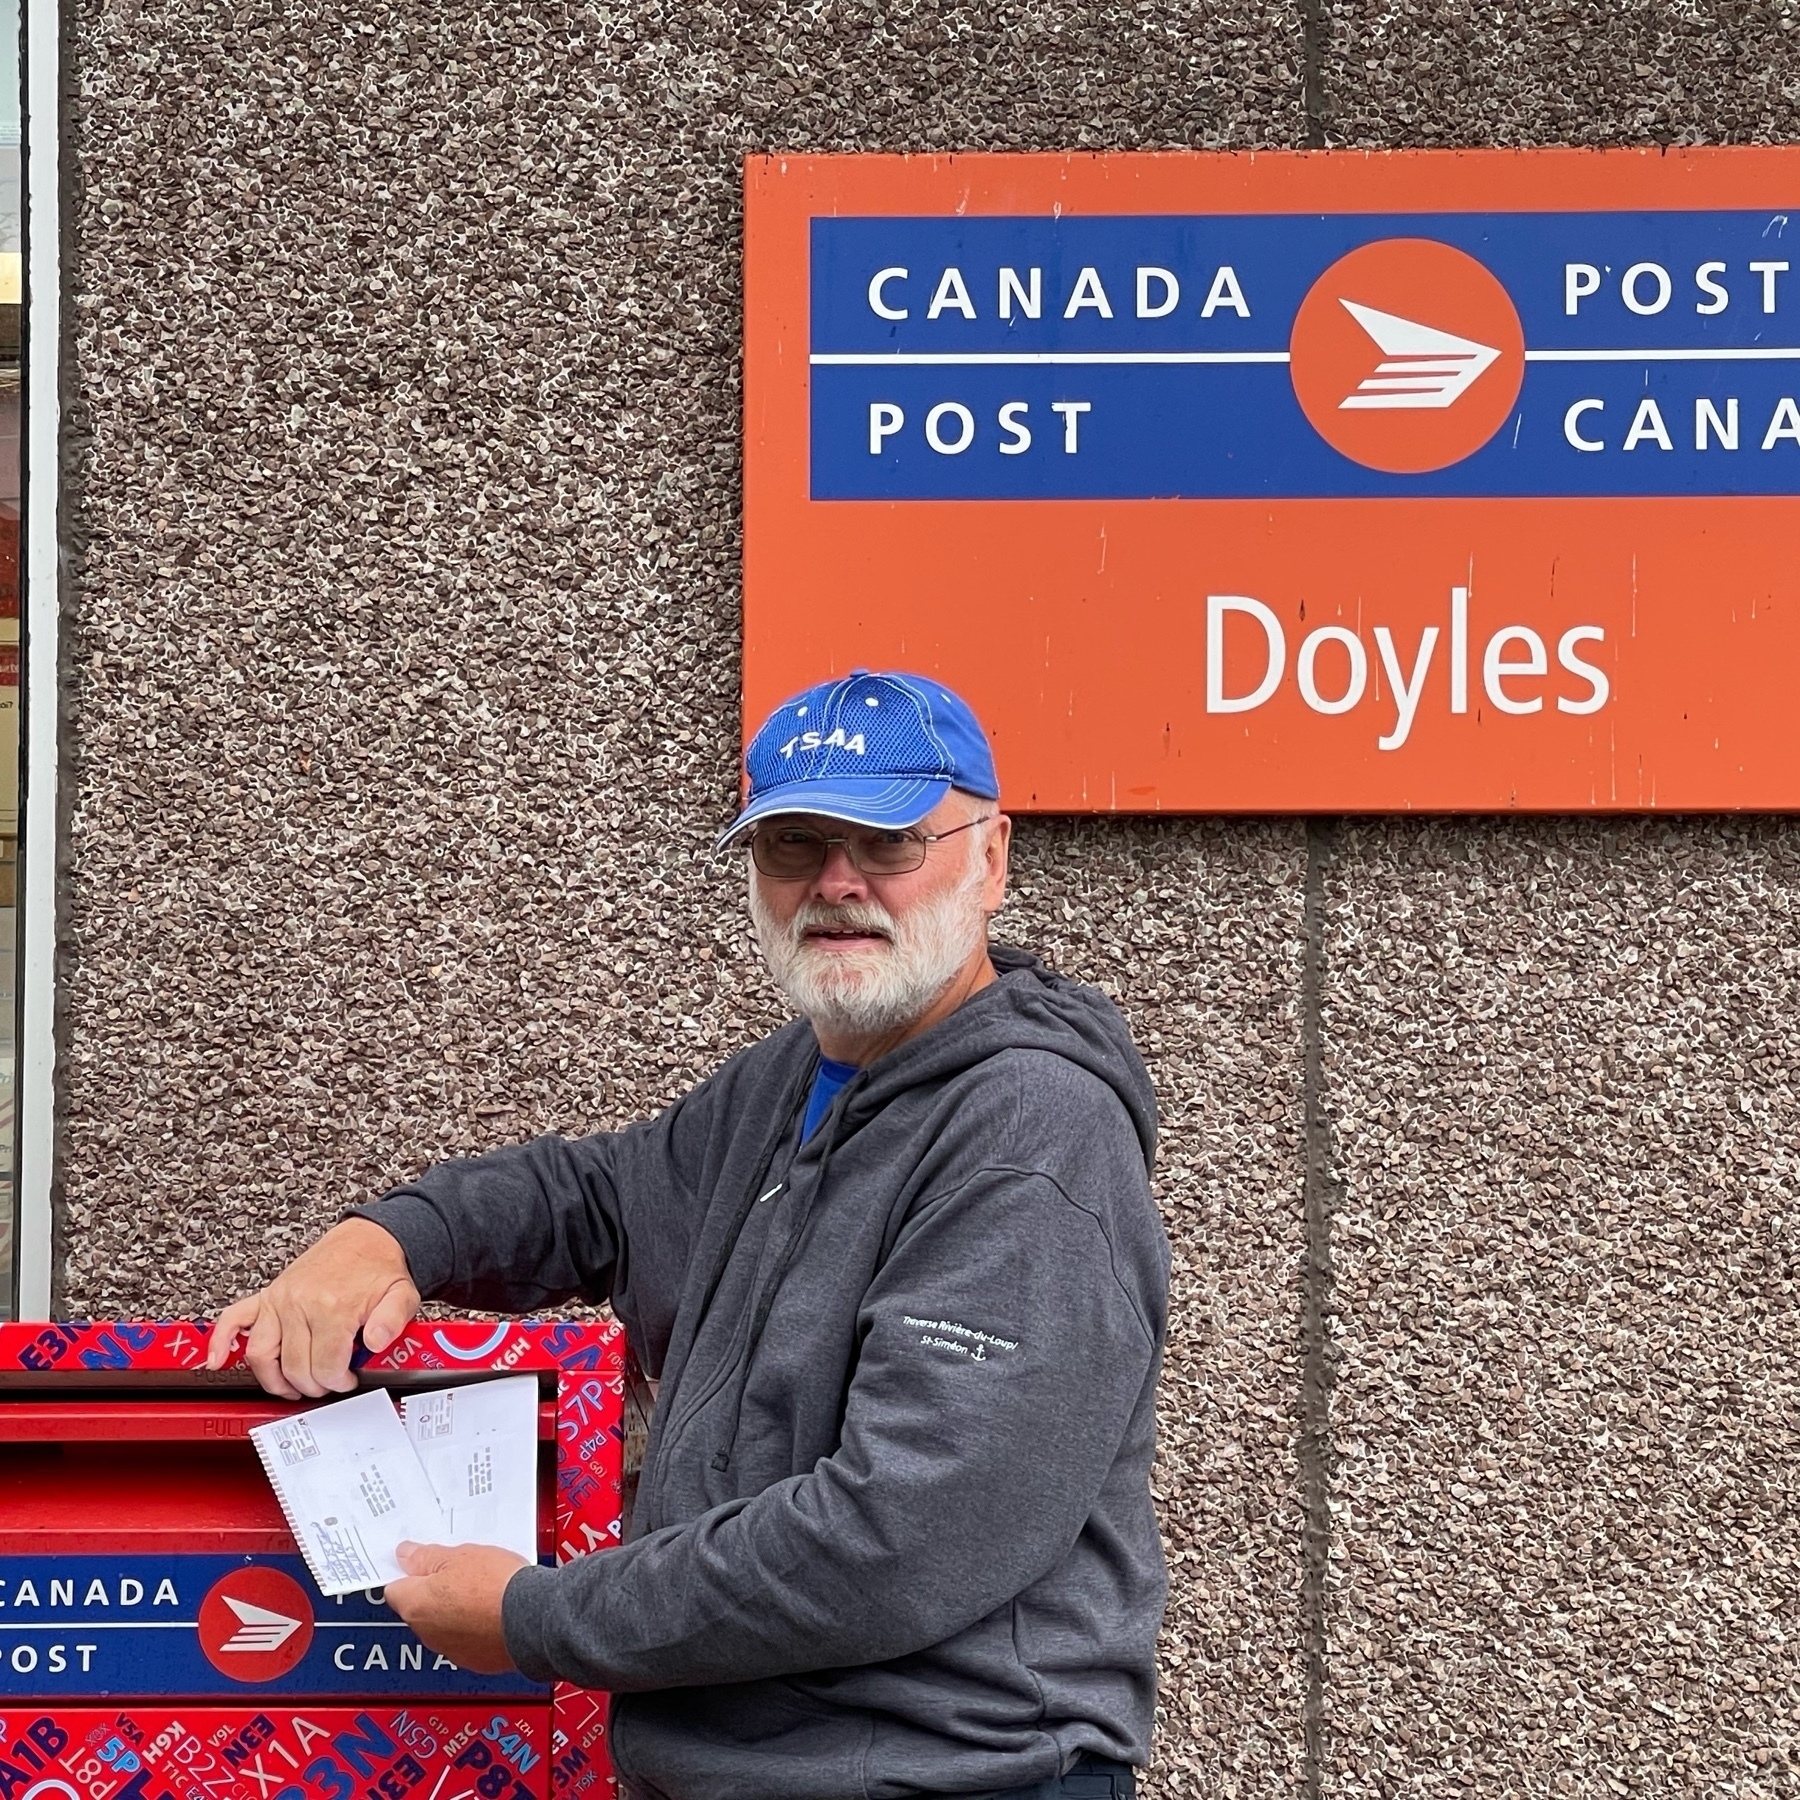 man mailing two envelops at Doyles post office